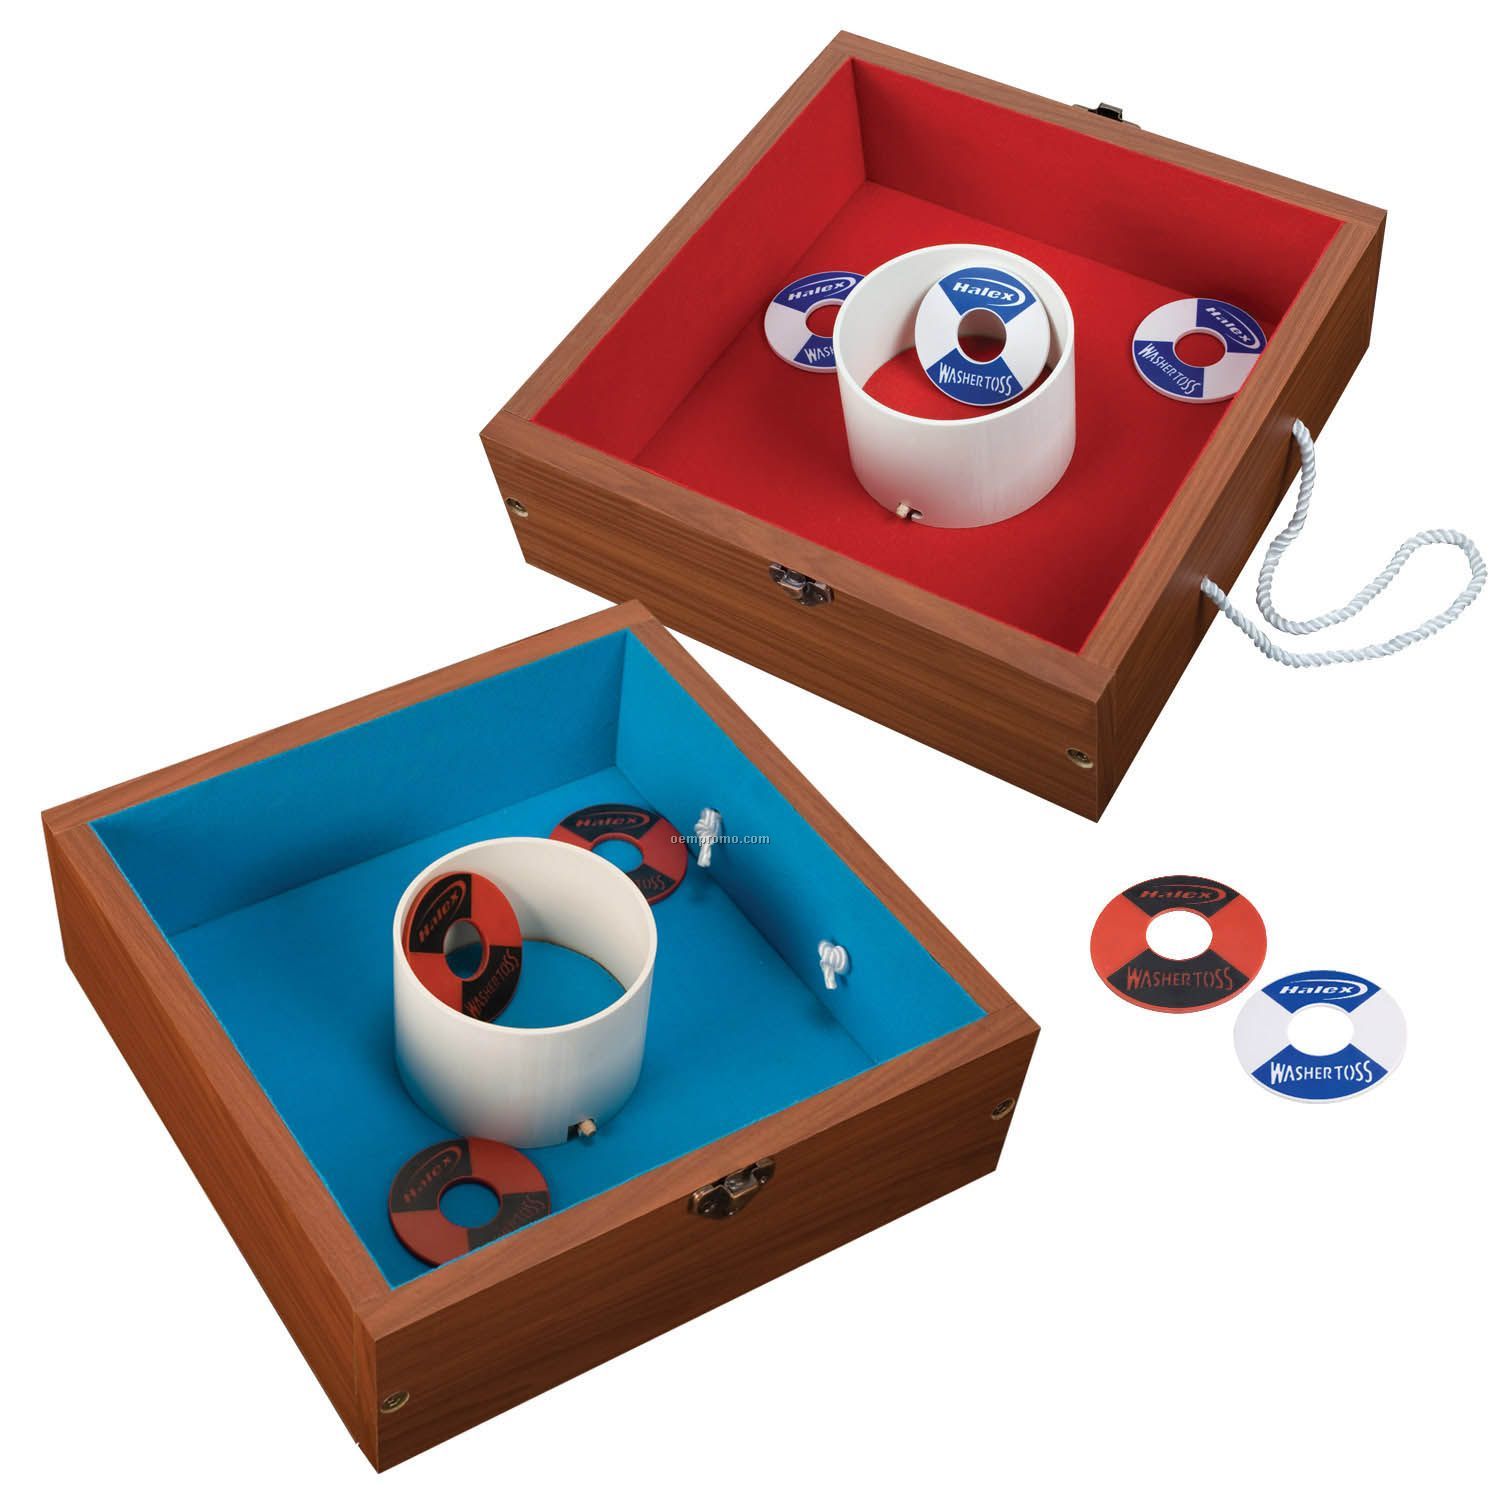 Halex Traditional Washer Toss Game